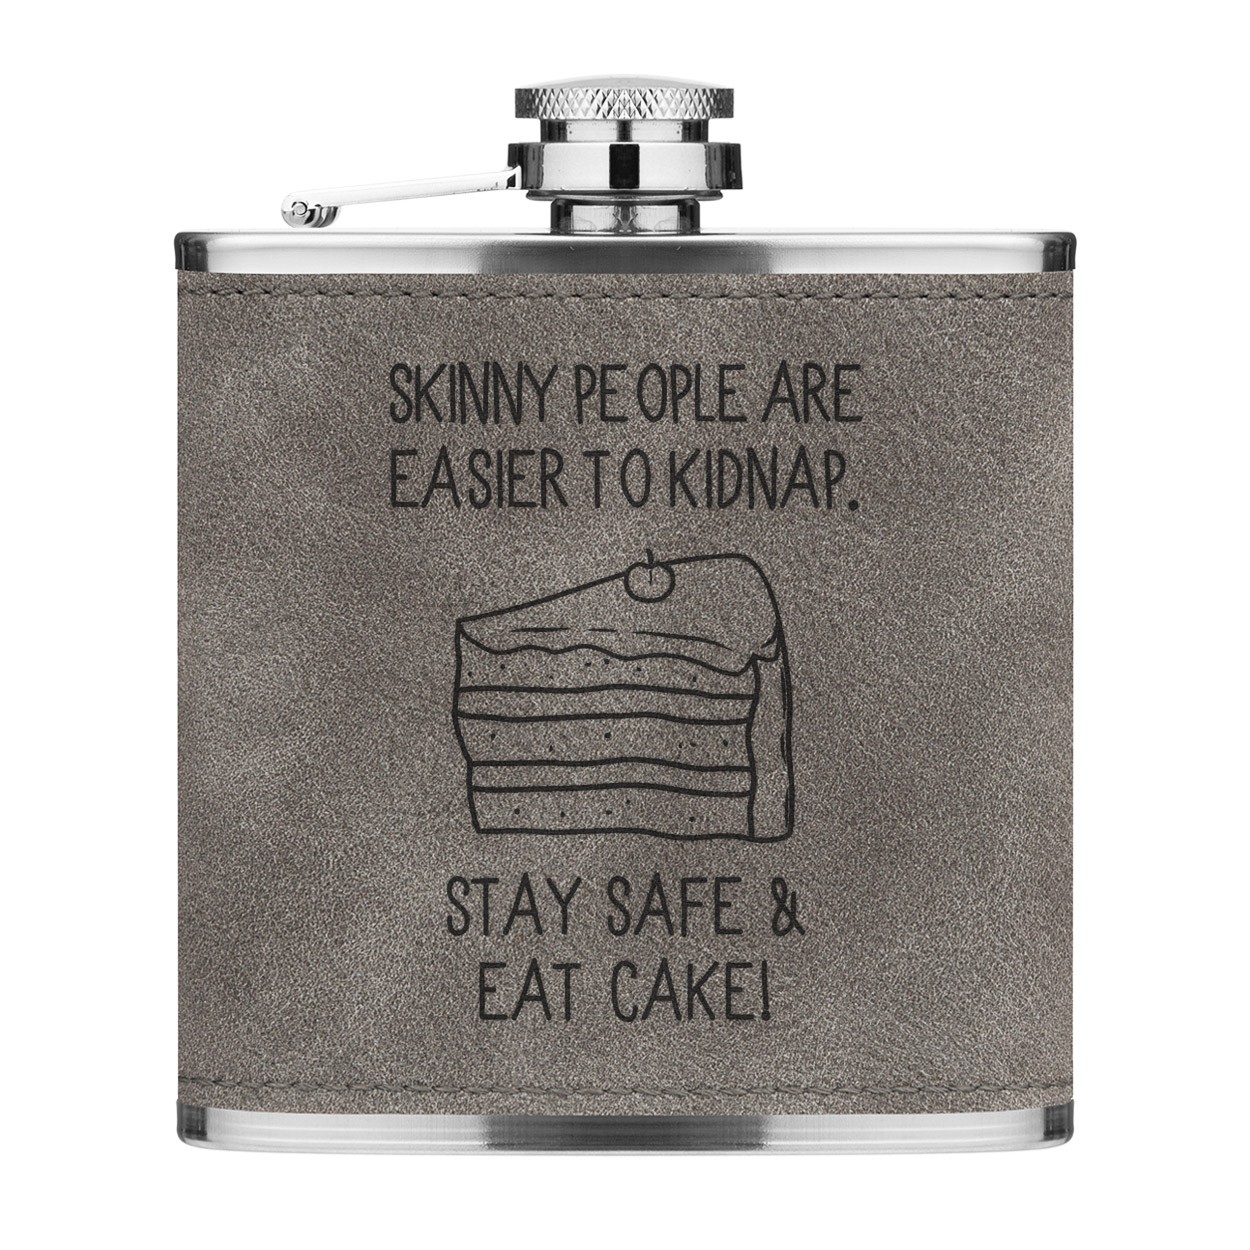 Skinny People Are Easier To Kidnap Stay Safe & Eat Cake 6oz PU Leather Hip Flask Grey Luxe